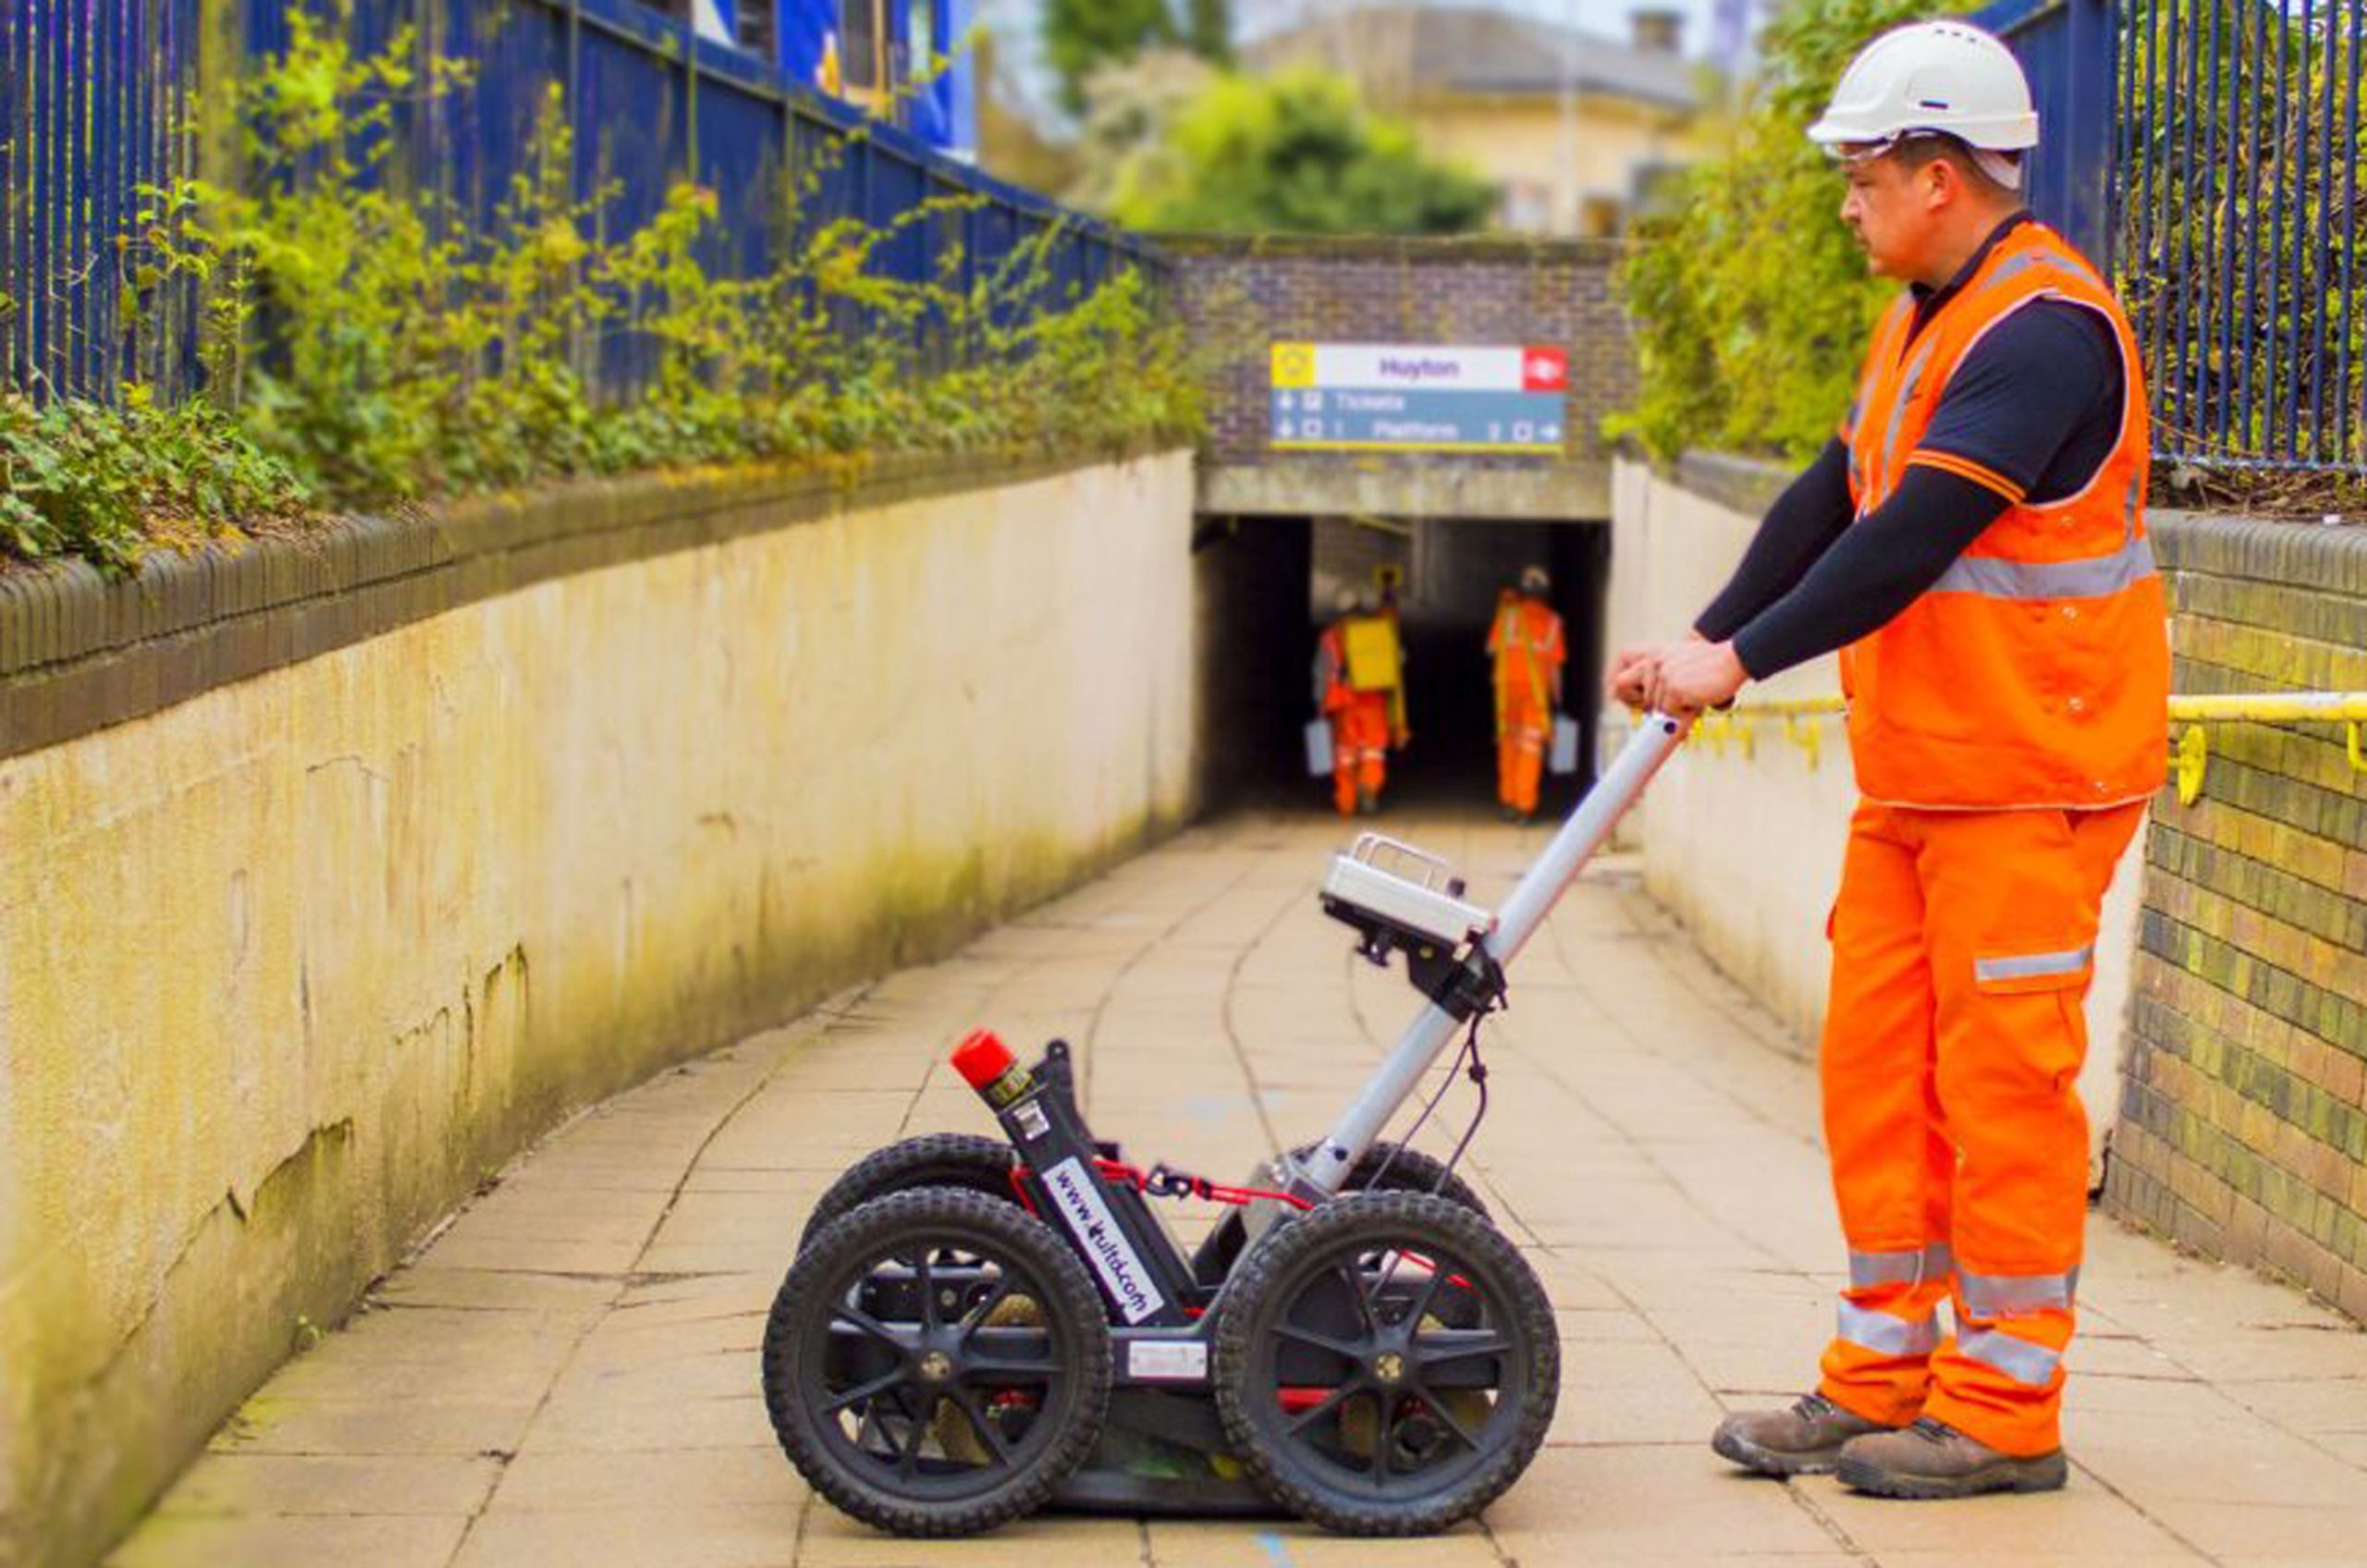 utility mapping – Using cutting edge dual frequency ground penetrating radar, electromagnetic cable avoidance tools and mapping using total station. PLS Geomatics 